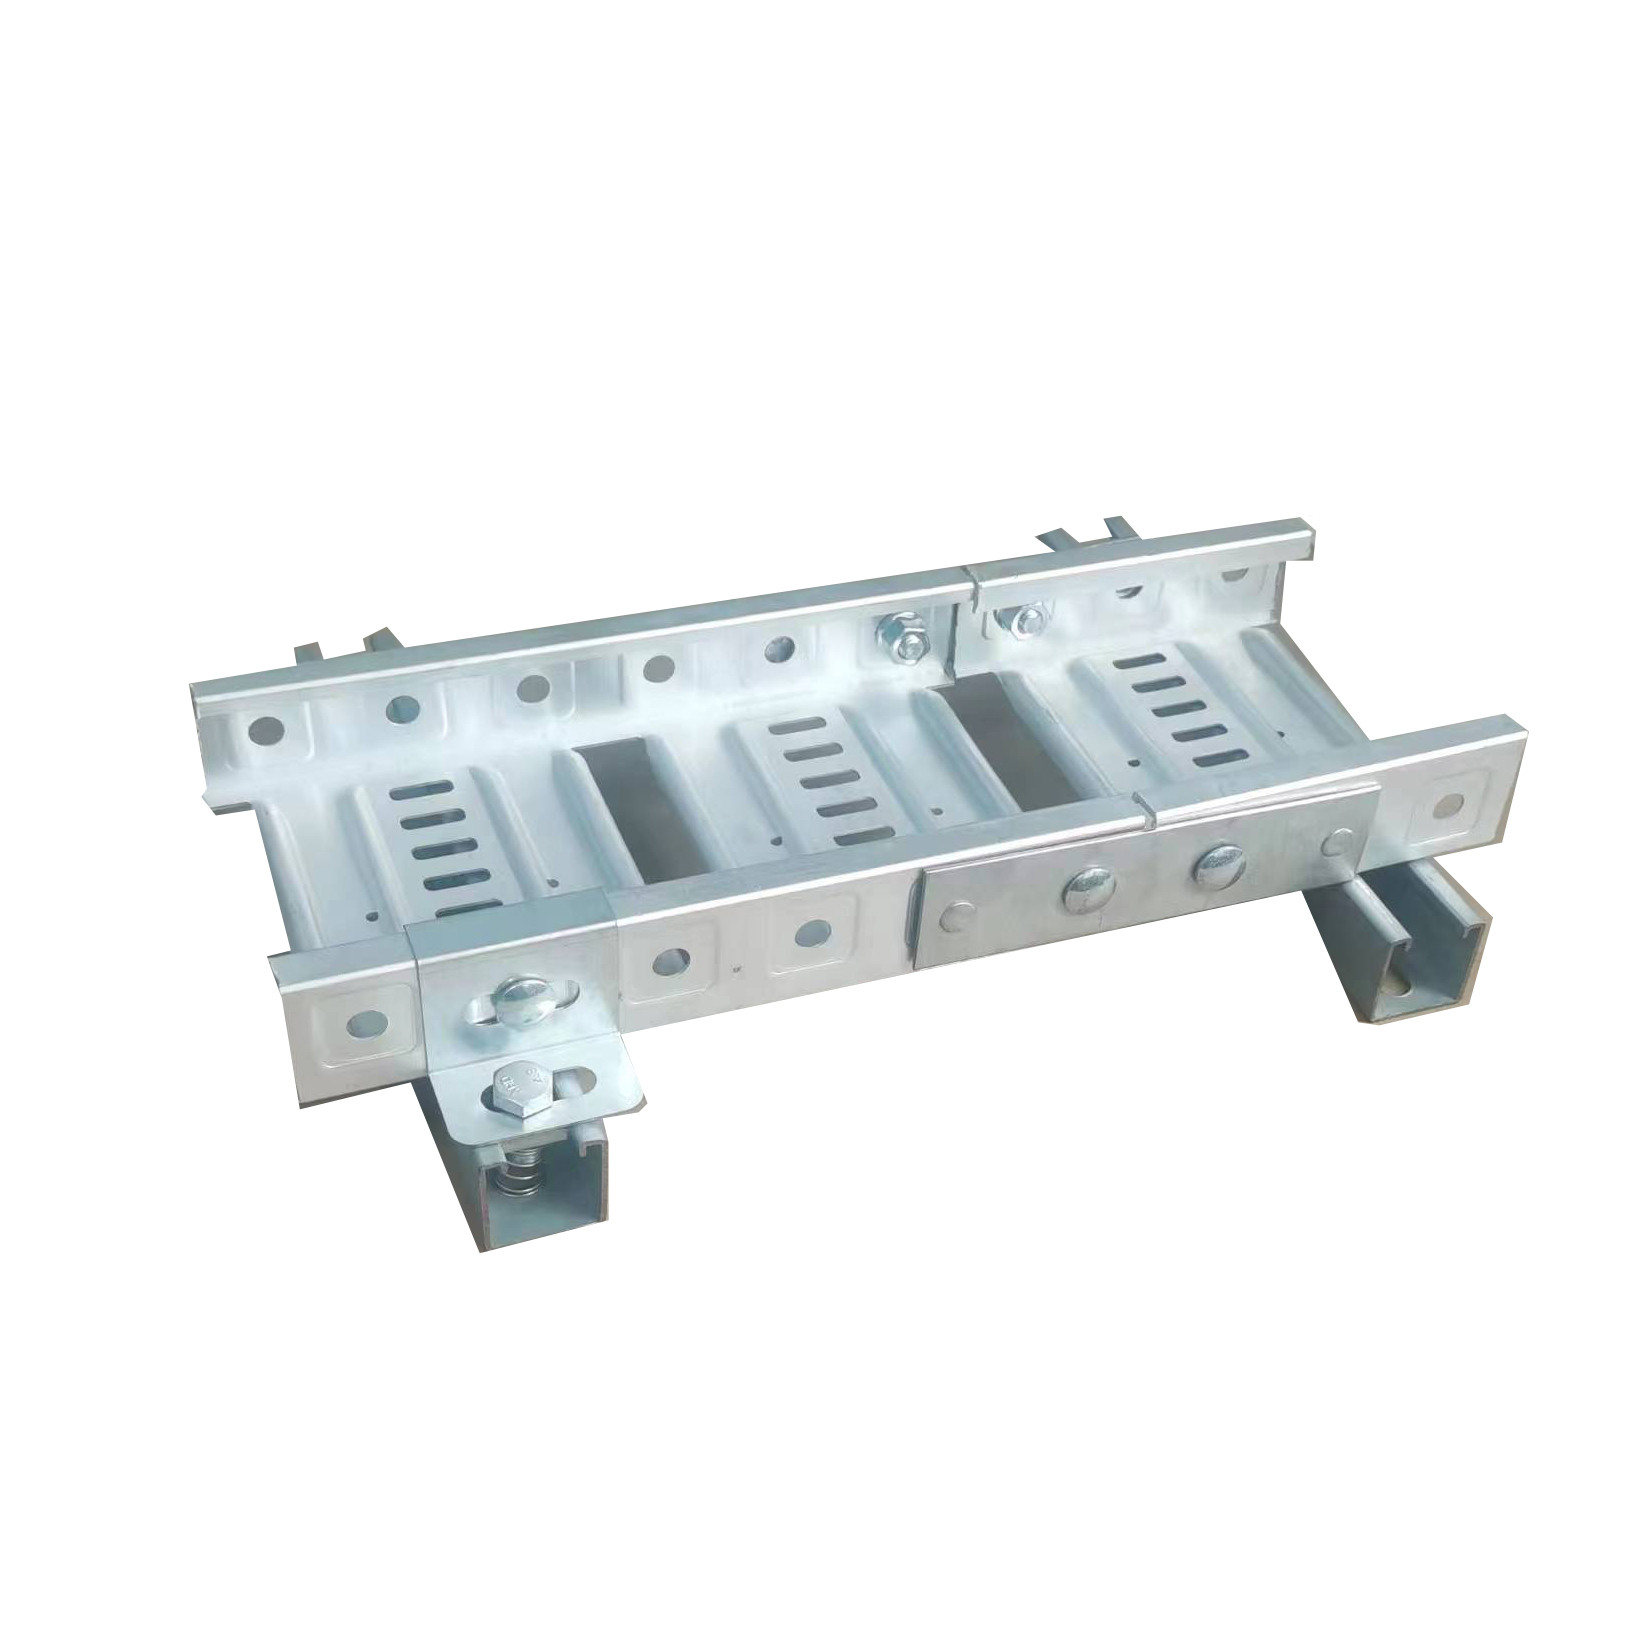 The hold-down device is used to fix the T3 cable tray to a certain length of strut/channel. Always use in pairs on opposite sides of the tray and fix T3 at least twice along its length.
A full range of T3 accessories can be provided to supplement the system and facilitate on-site manufacturing.
T3 fittings are applicable to all tray widths and can be used to make tee, riser, elbow and cross.